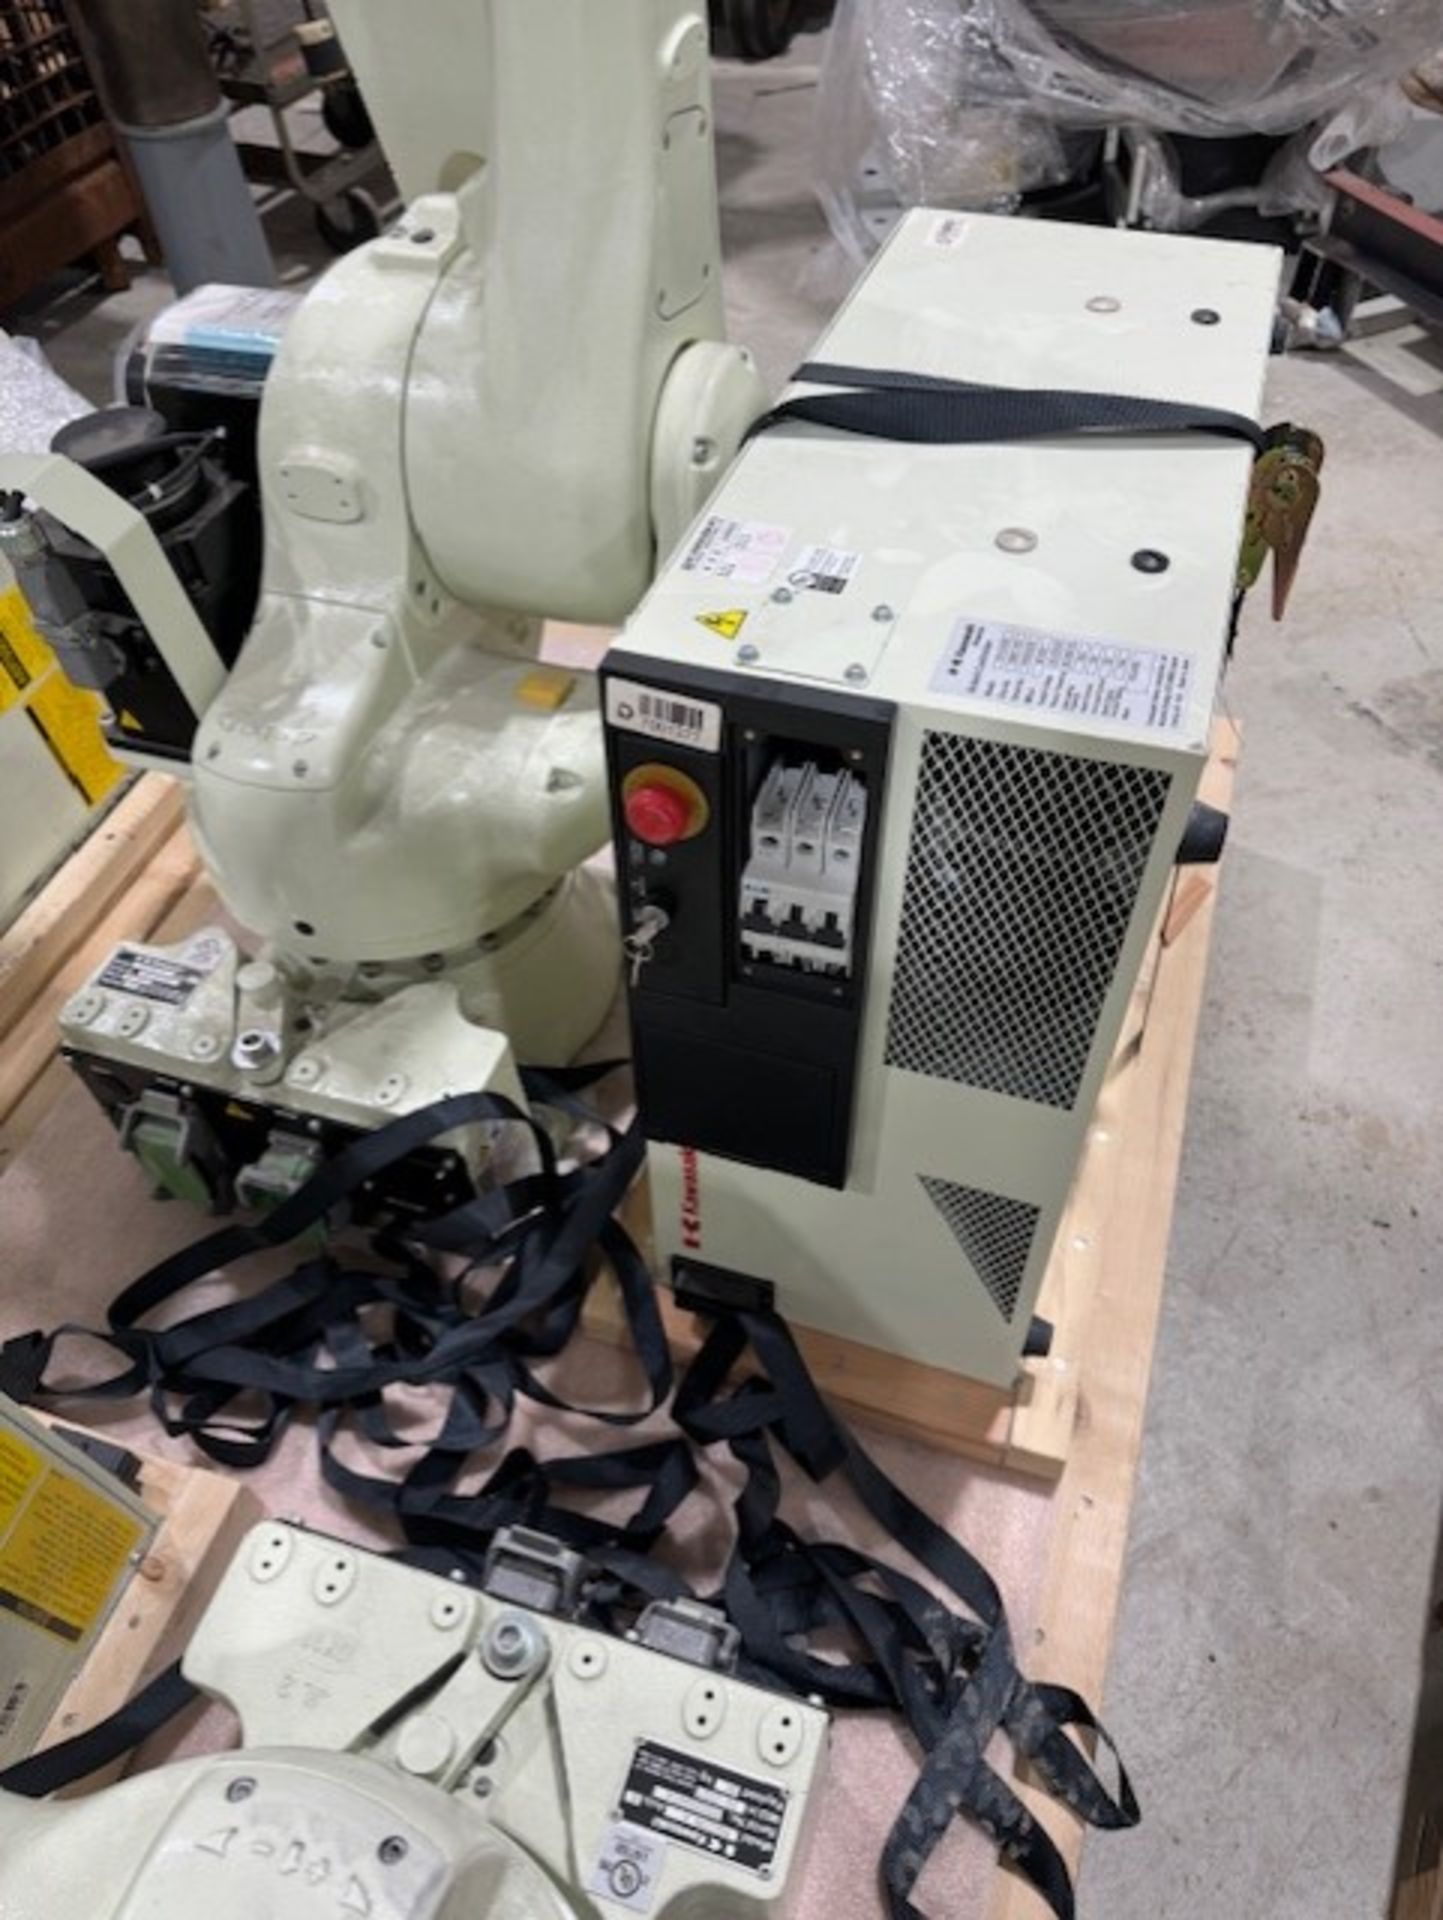 LIGHTLY USED KAWASAKI ROBOT RS020N, SN 4513, 20KG X 1725MM REACH WITH EO1 CONTROLS, CABLES & TEACH - Image 2 of 7